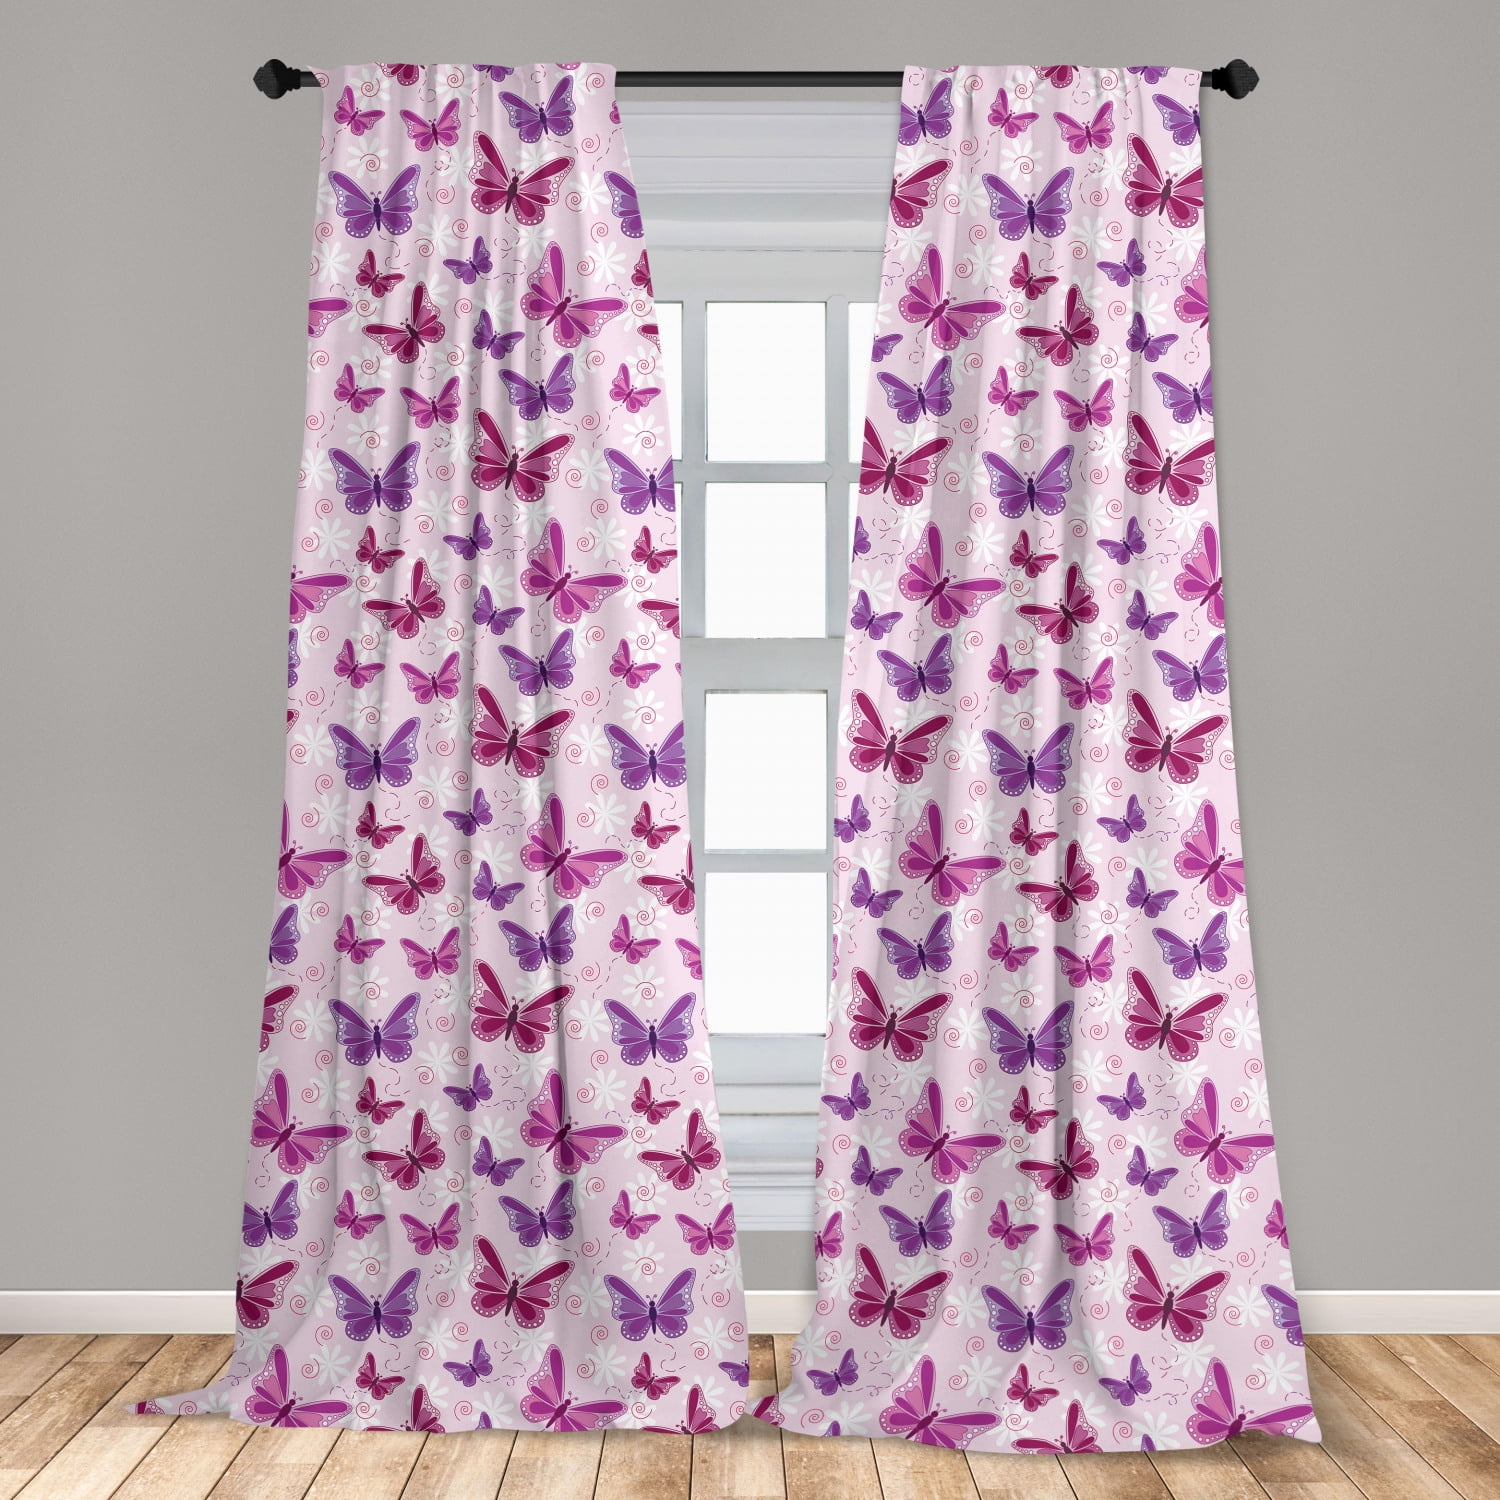 3D Blossom Butterfly Photo Printing Blockout 2Panel Curtain Drapes Fabric Window 